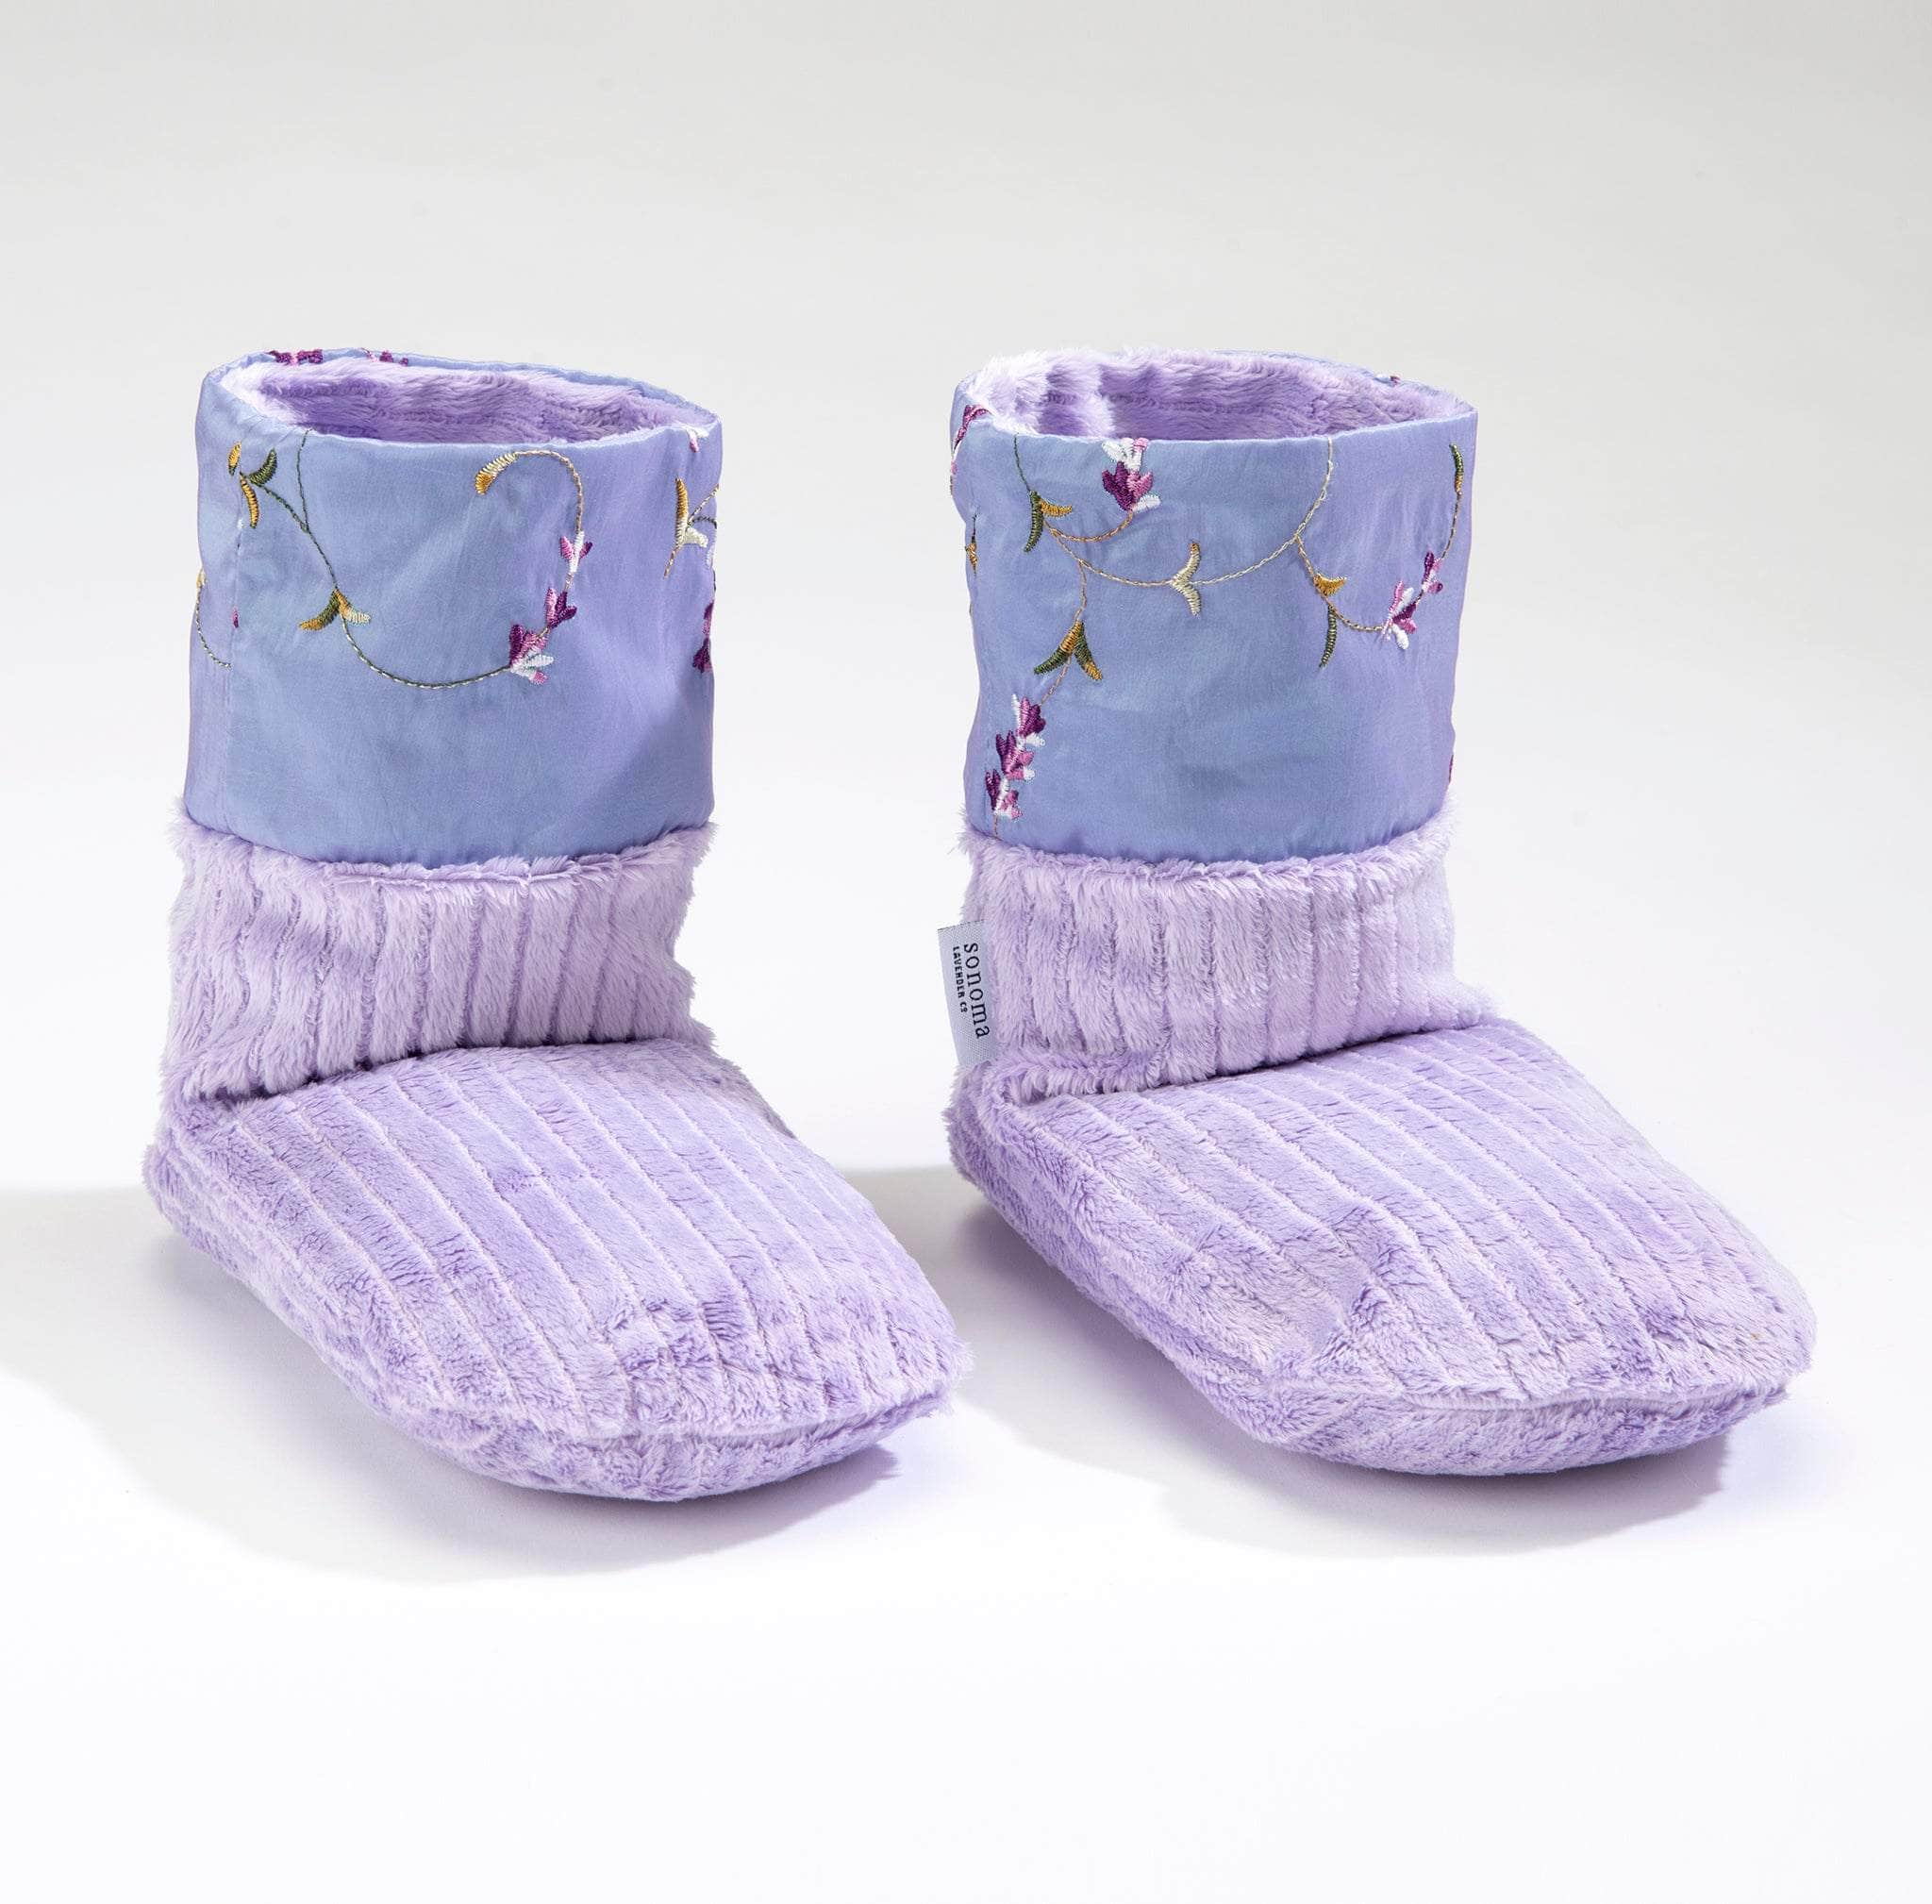 Lavender Spa Booties with Embroidered Lilac Cuffs